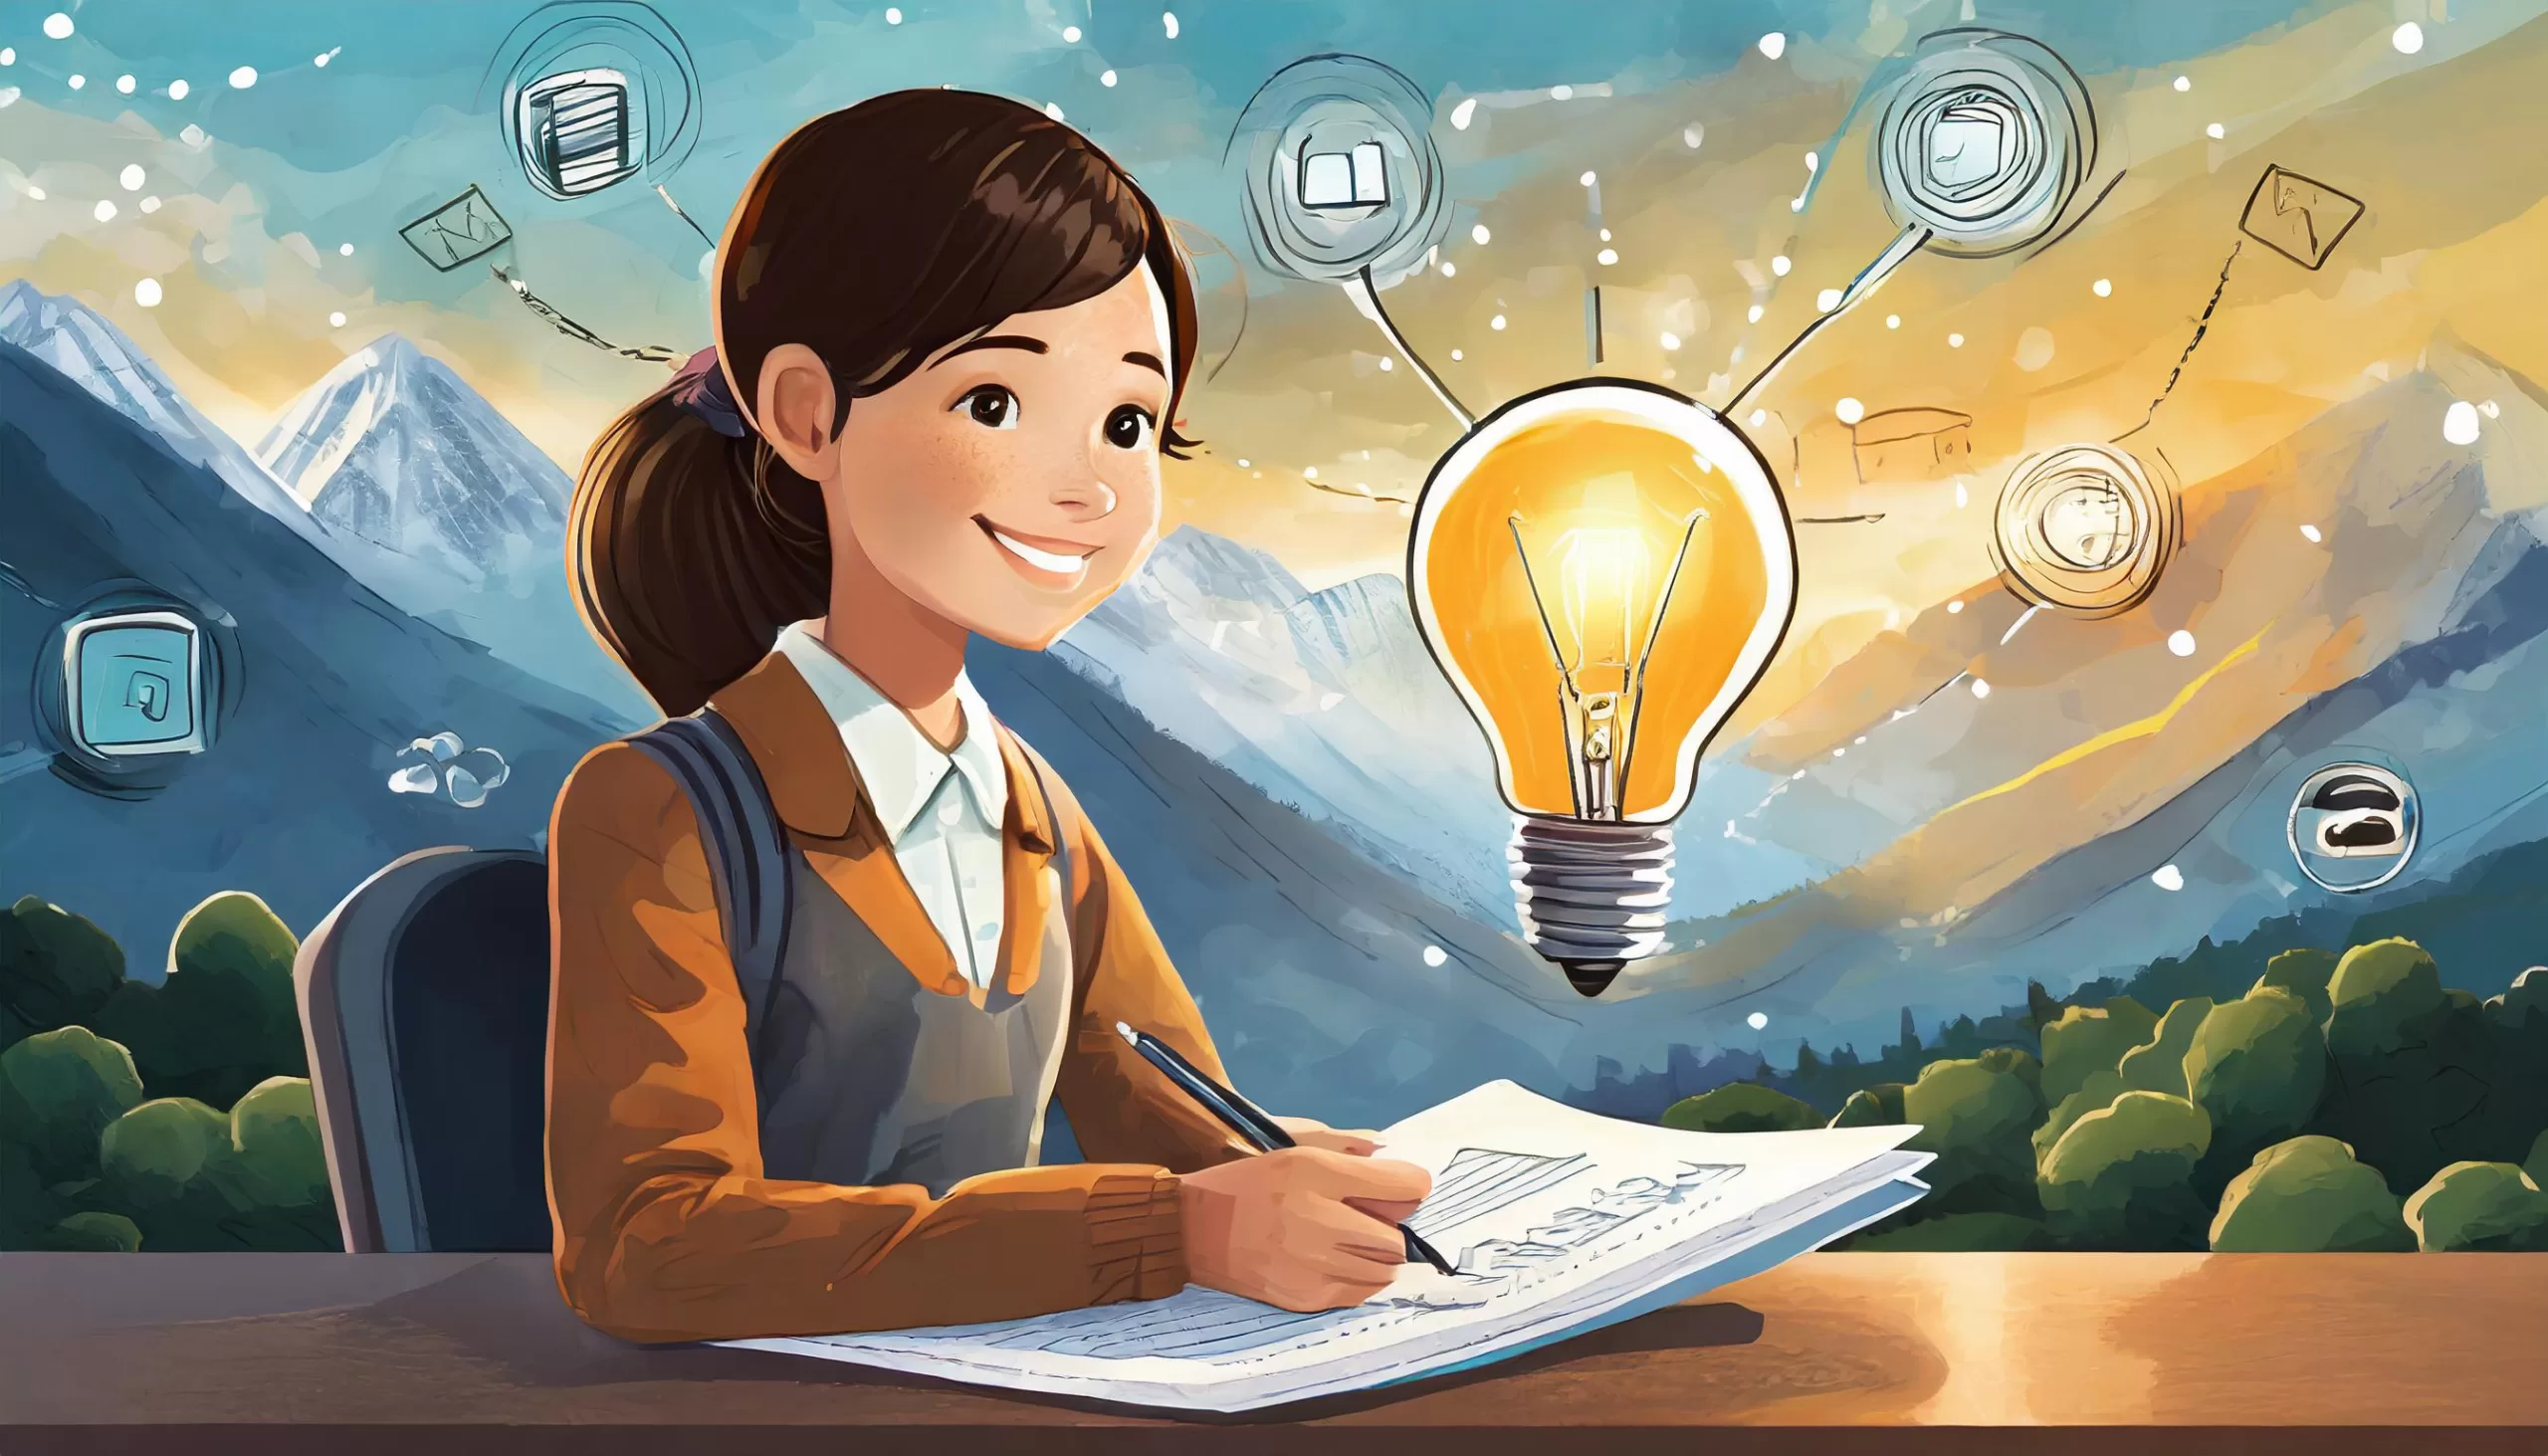 Firefly Illustration of a thoughtful teenager drafting a personalized objective on their resume wit scaled